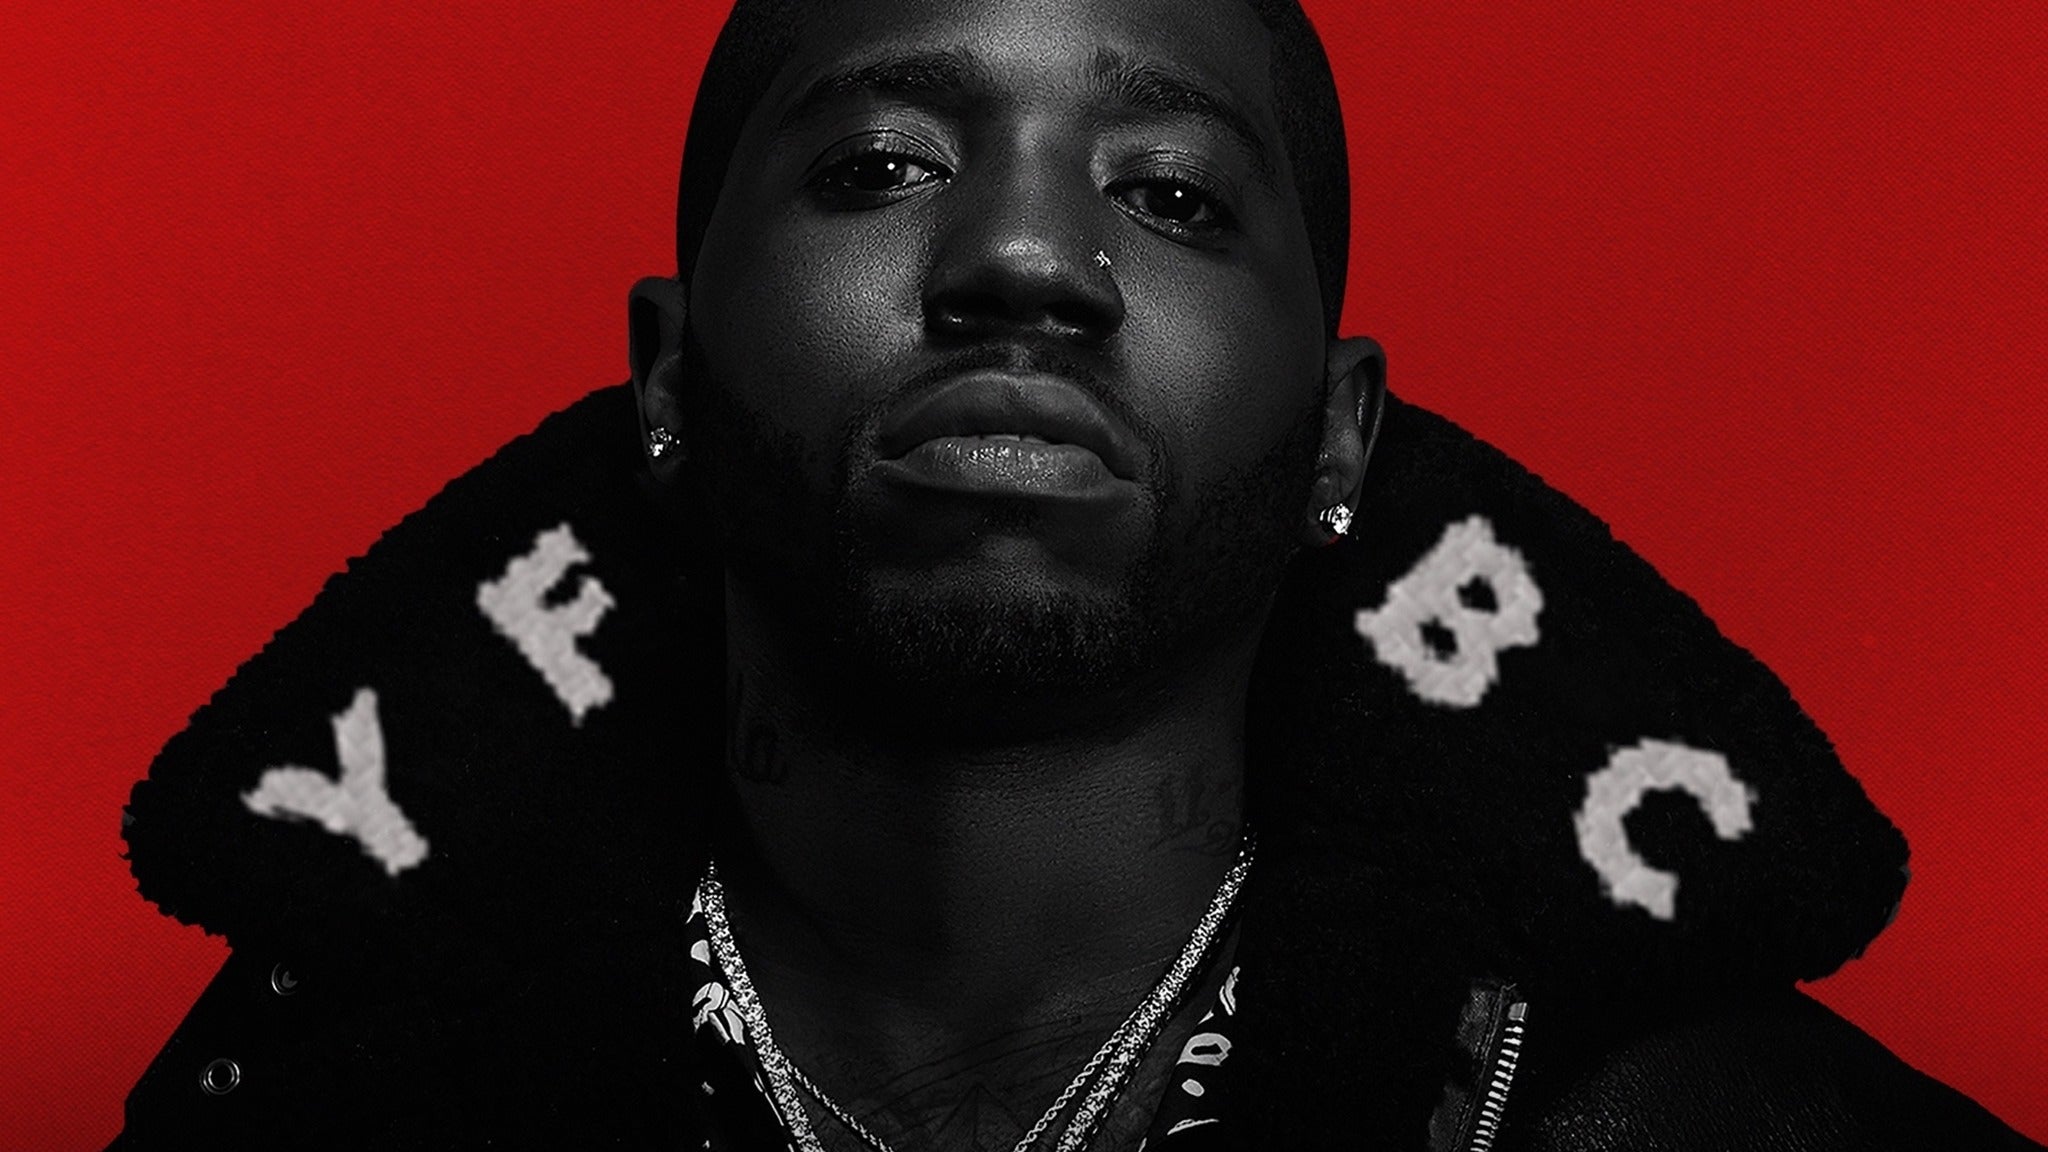 Yfn Lucci in Indianapolis promo photo for Live Nation Mobile App presale offer code